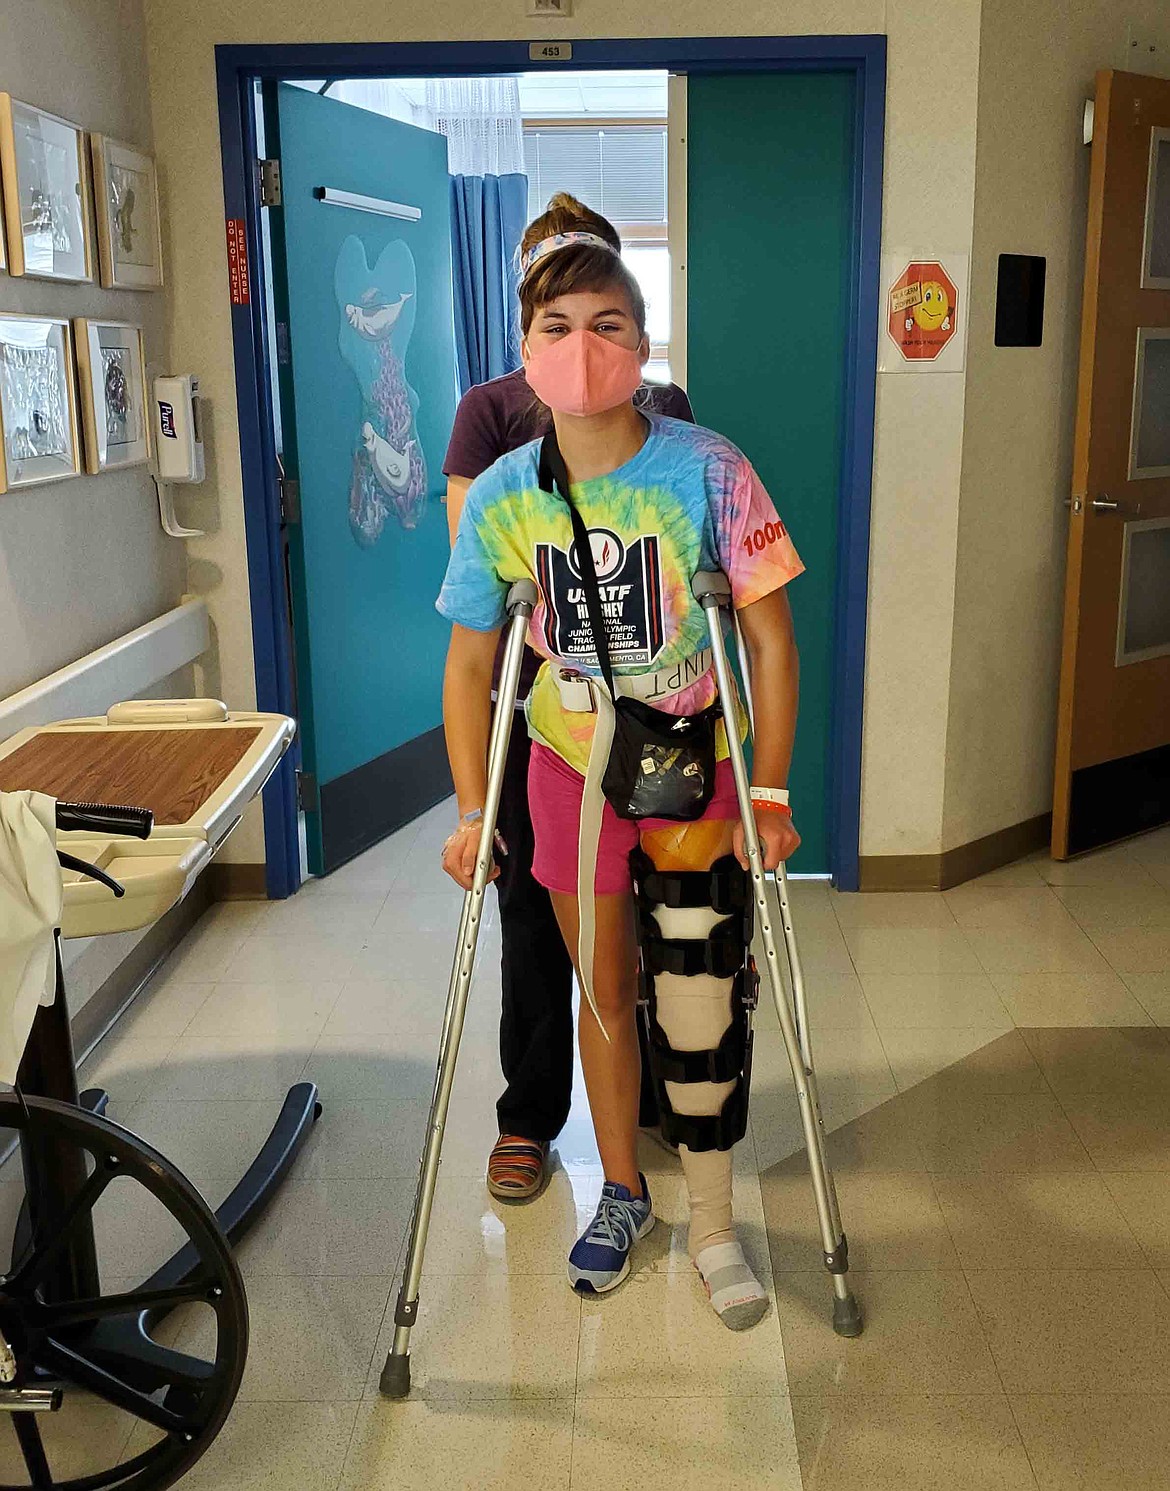 Incoming Coeur d'Alene High School freshman Mari Nelson is on track to compete in the 2021 National Junior Olympics Track and Field Championships, despite tearing her ACL last summer. She underwent surgery at the Shriners Hospitals for Children and is back to running her same speed in less than a year.